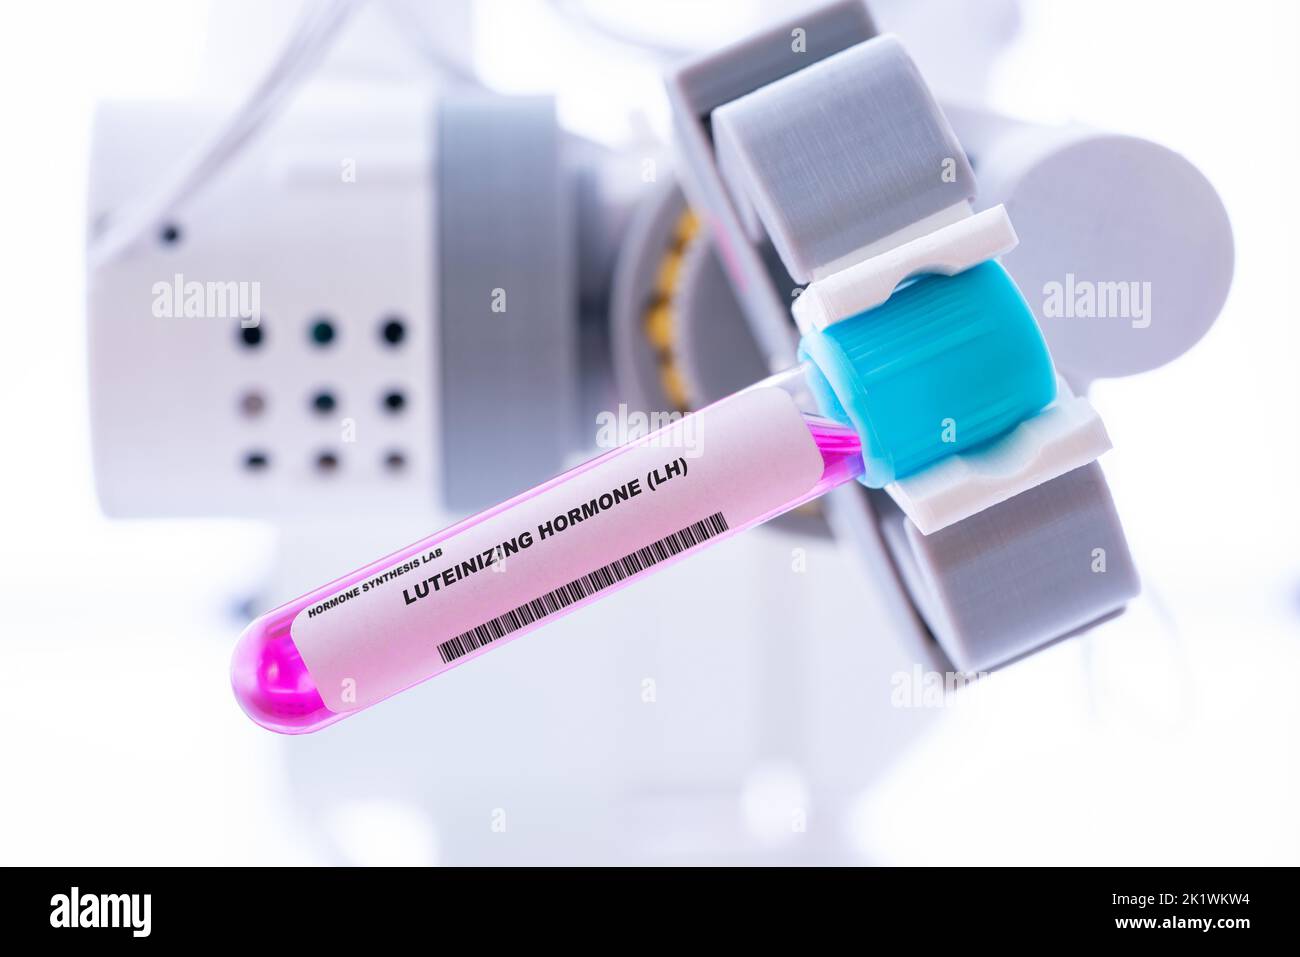 Syringe and vial of luteinizing hormone, conceptual image Stock Photo